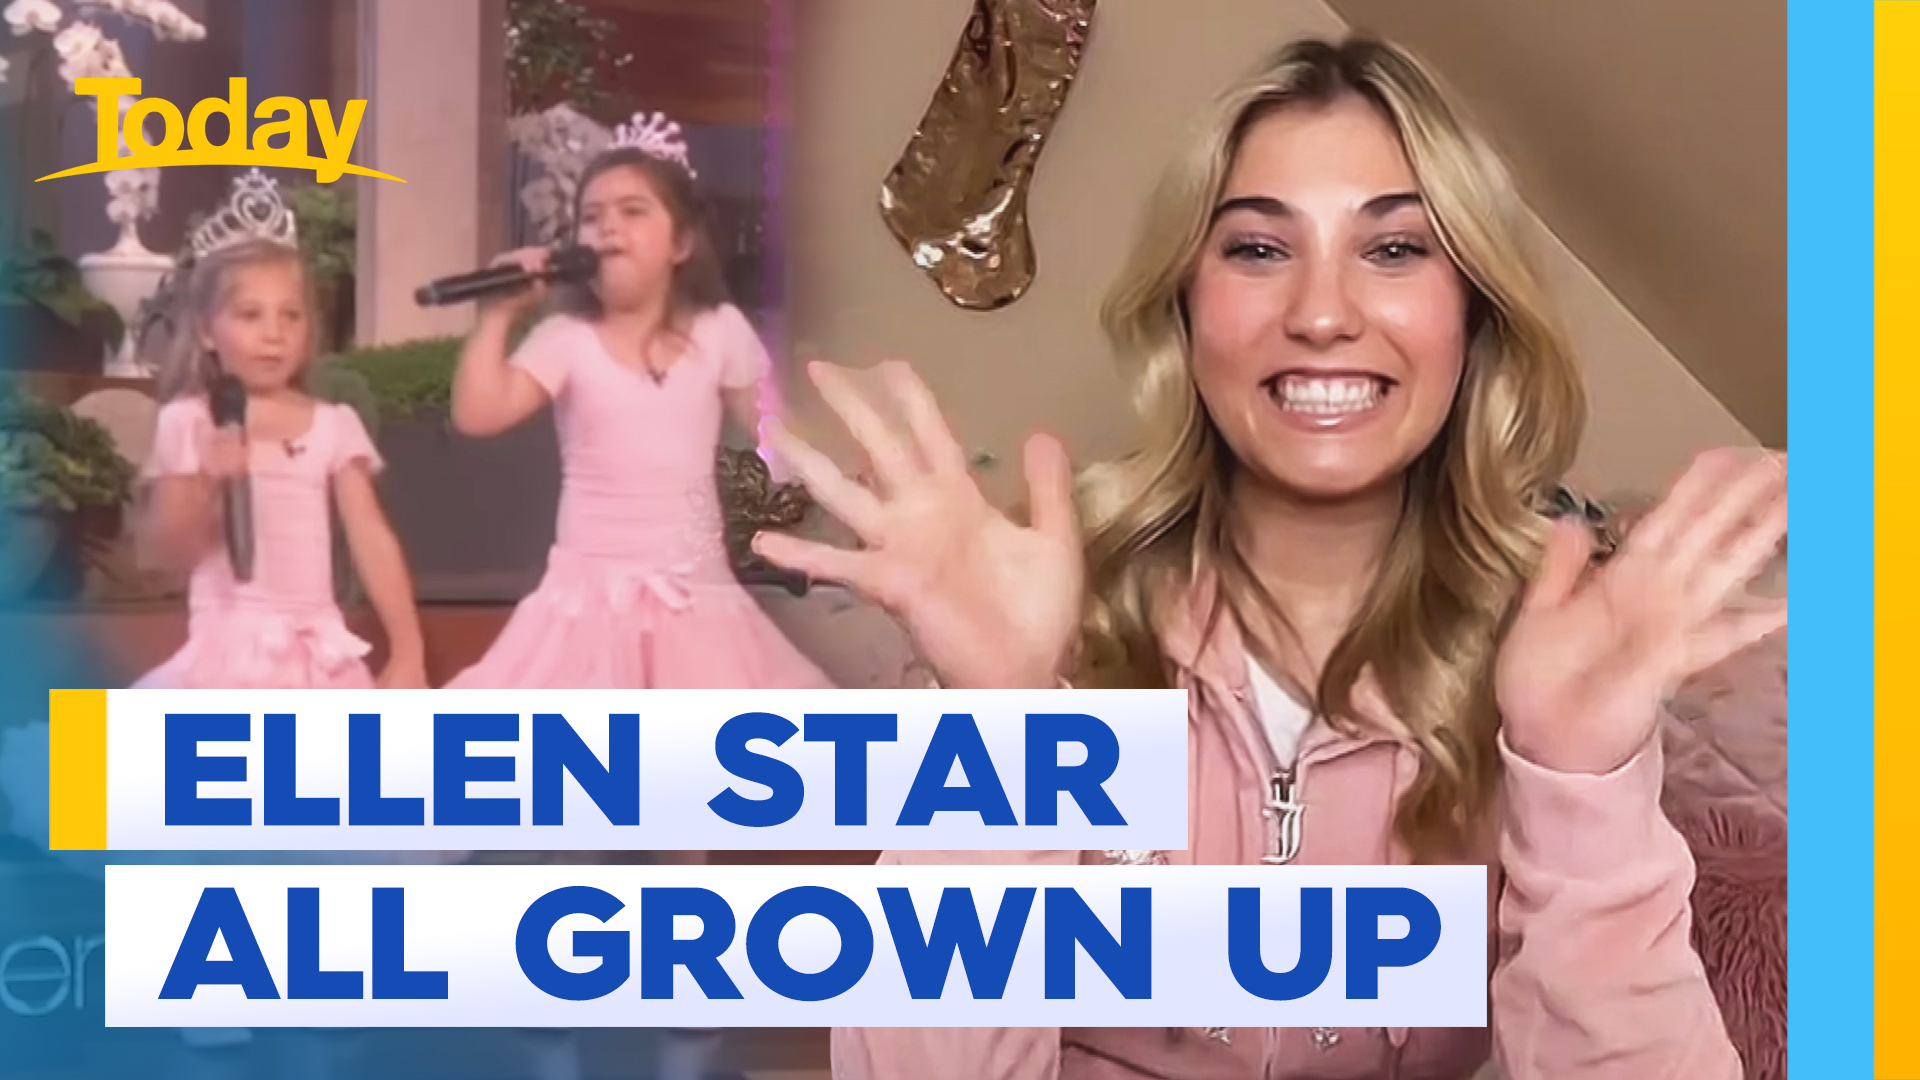 Today Extra catches up with one half of Rosie and Sophia Grace